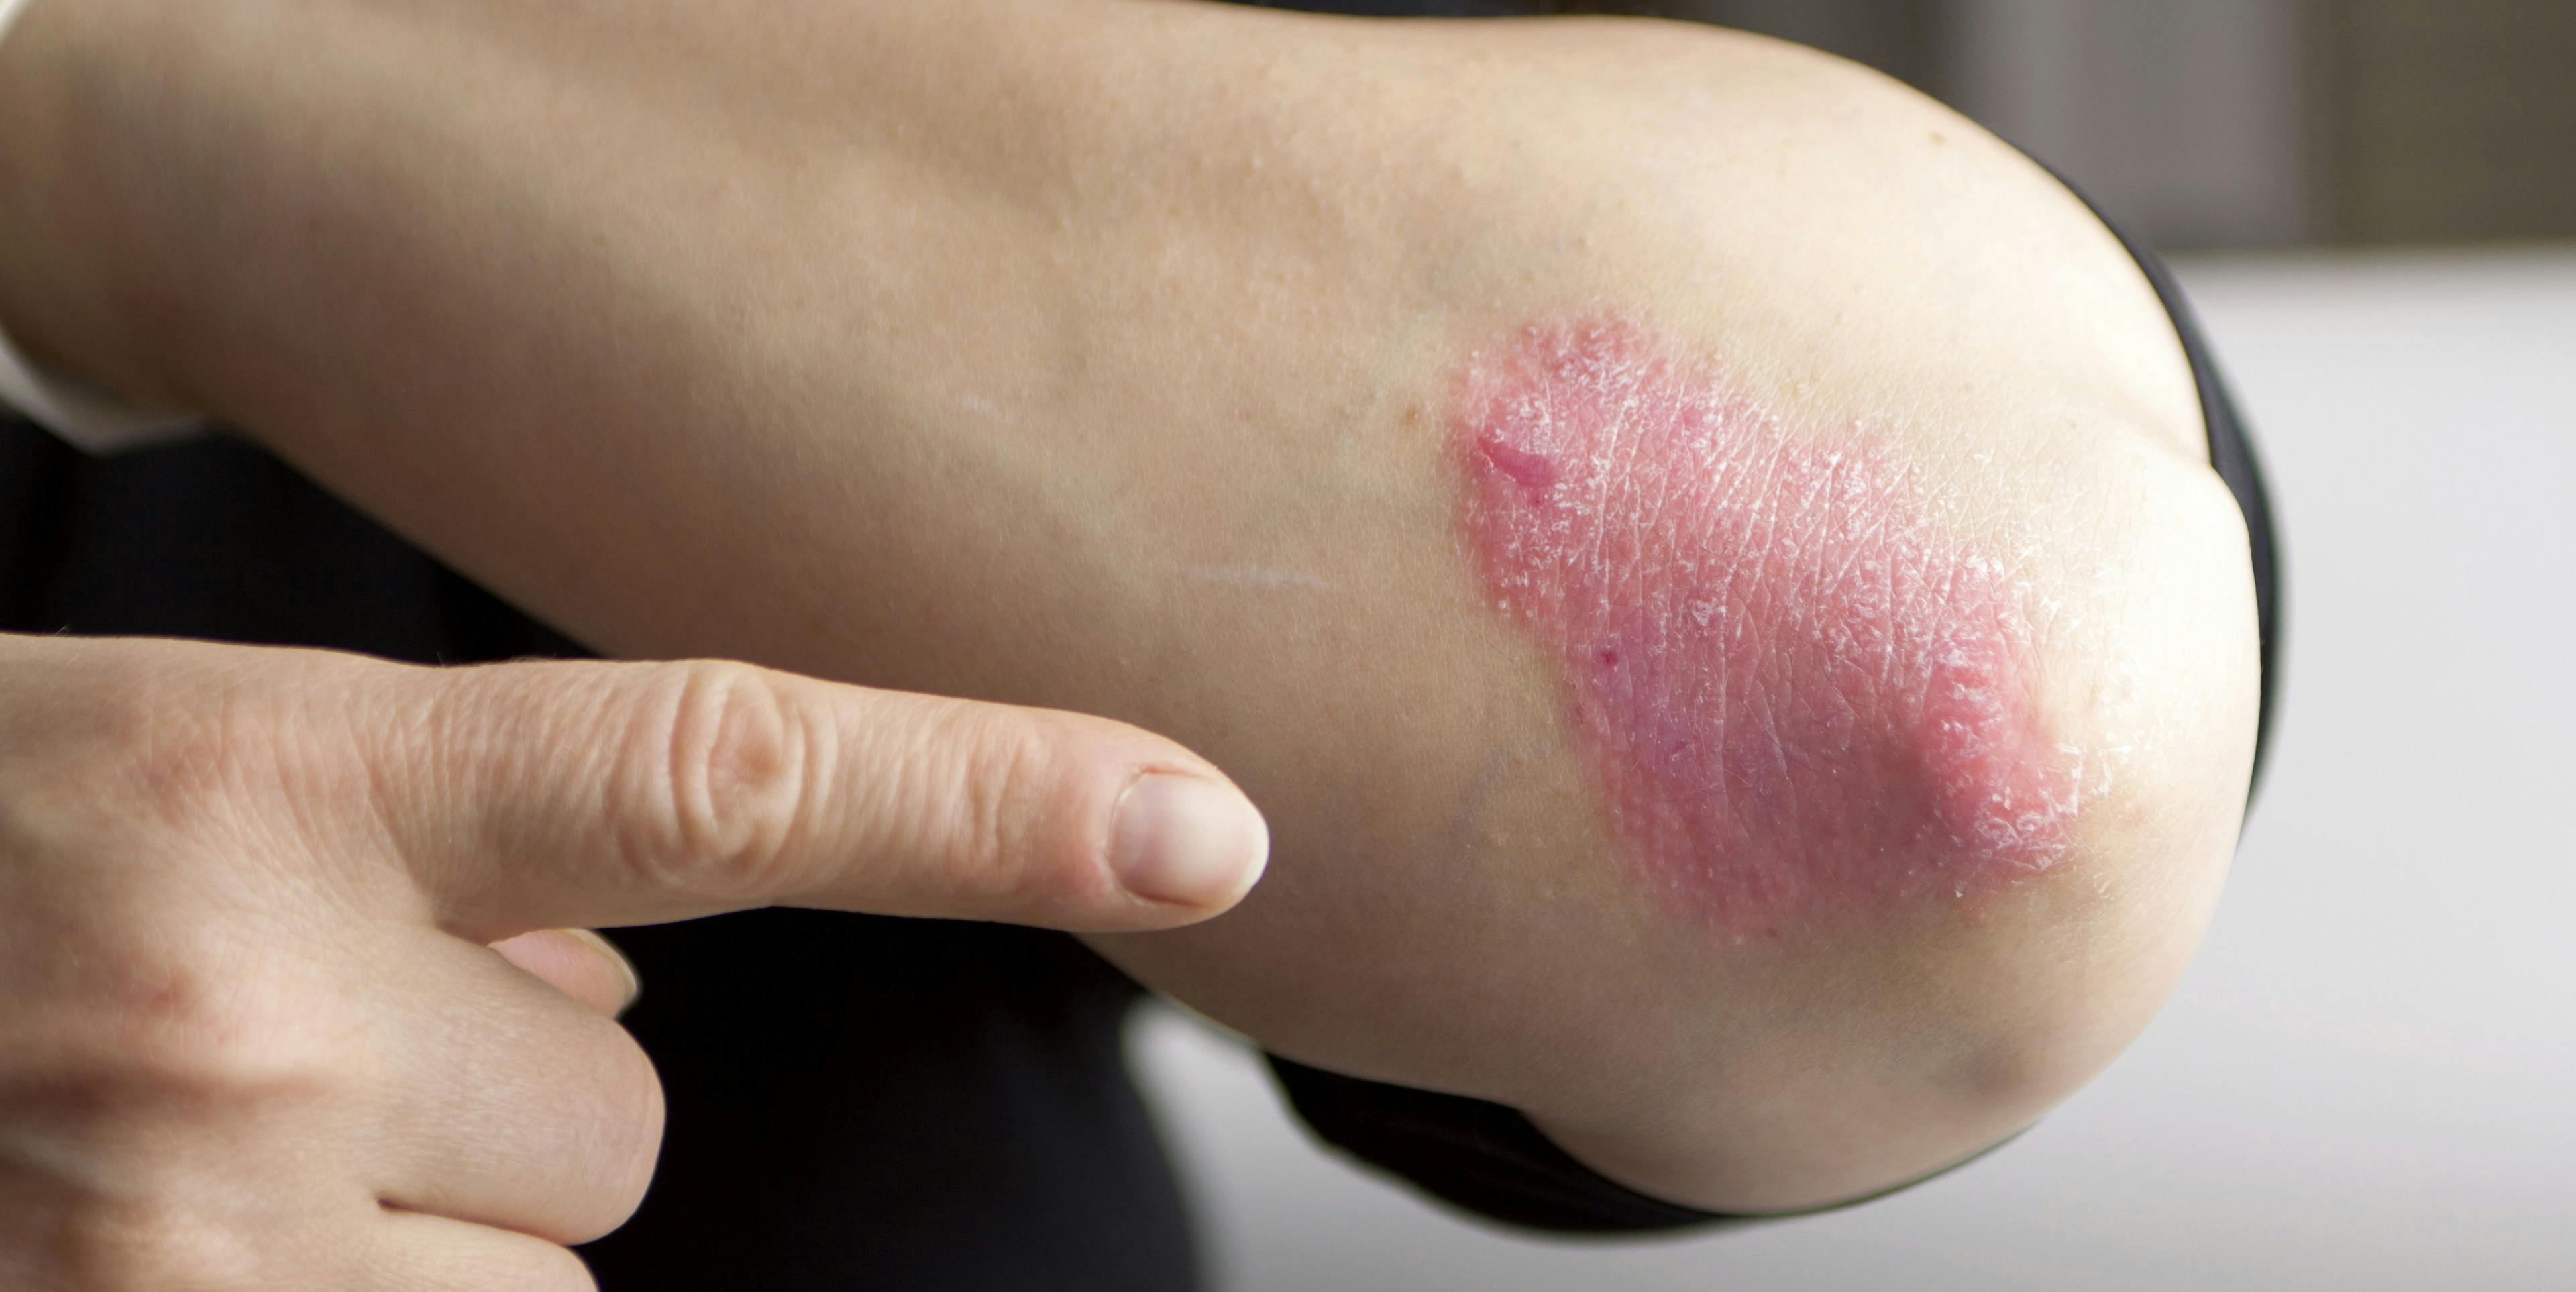 FDA Approves New Psoriasis Treatment